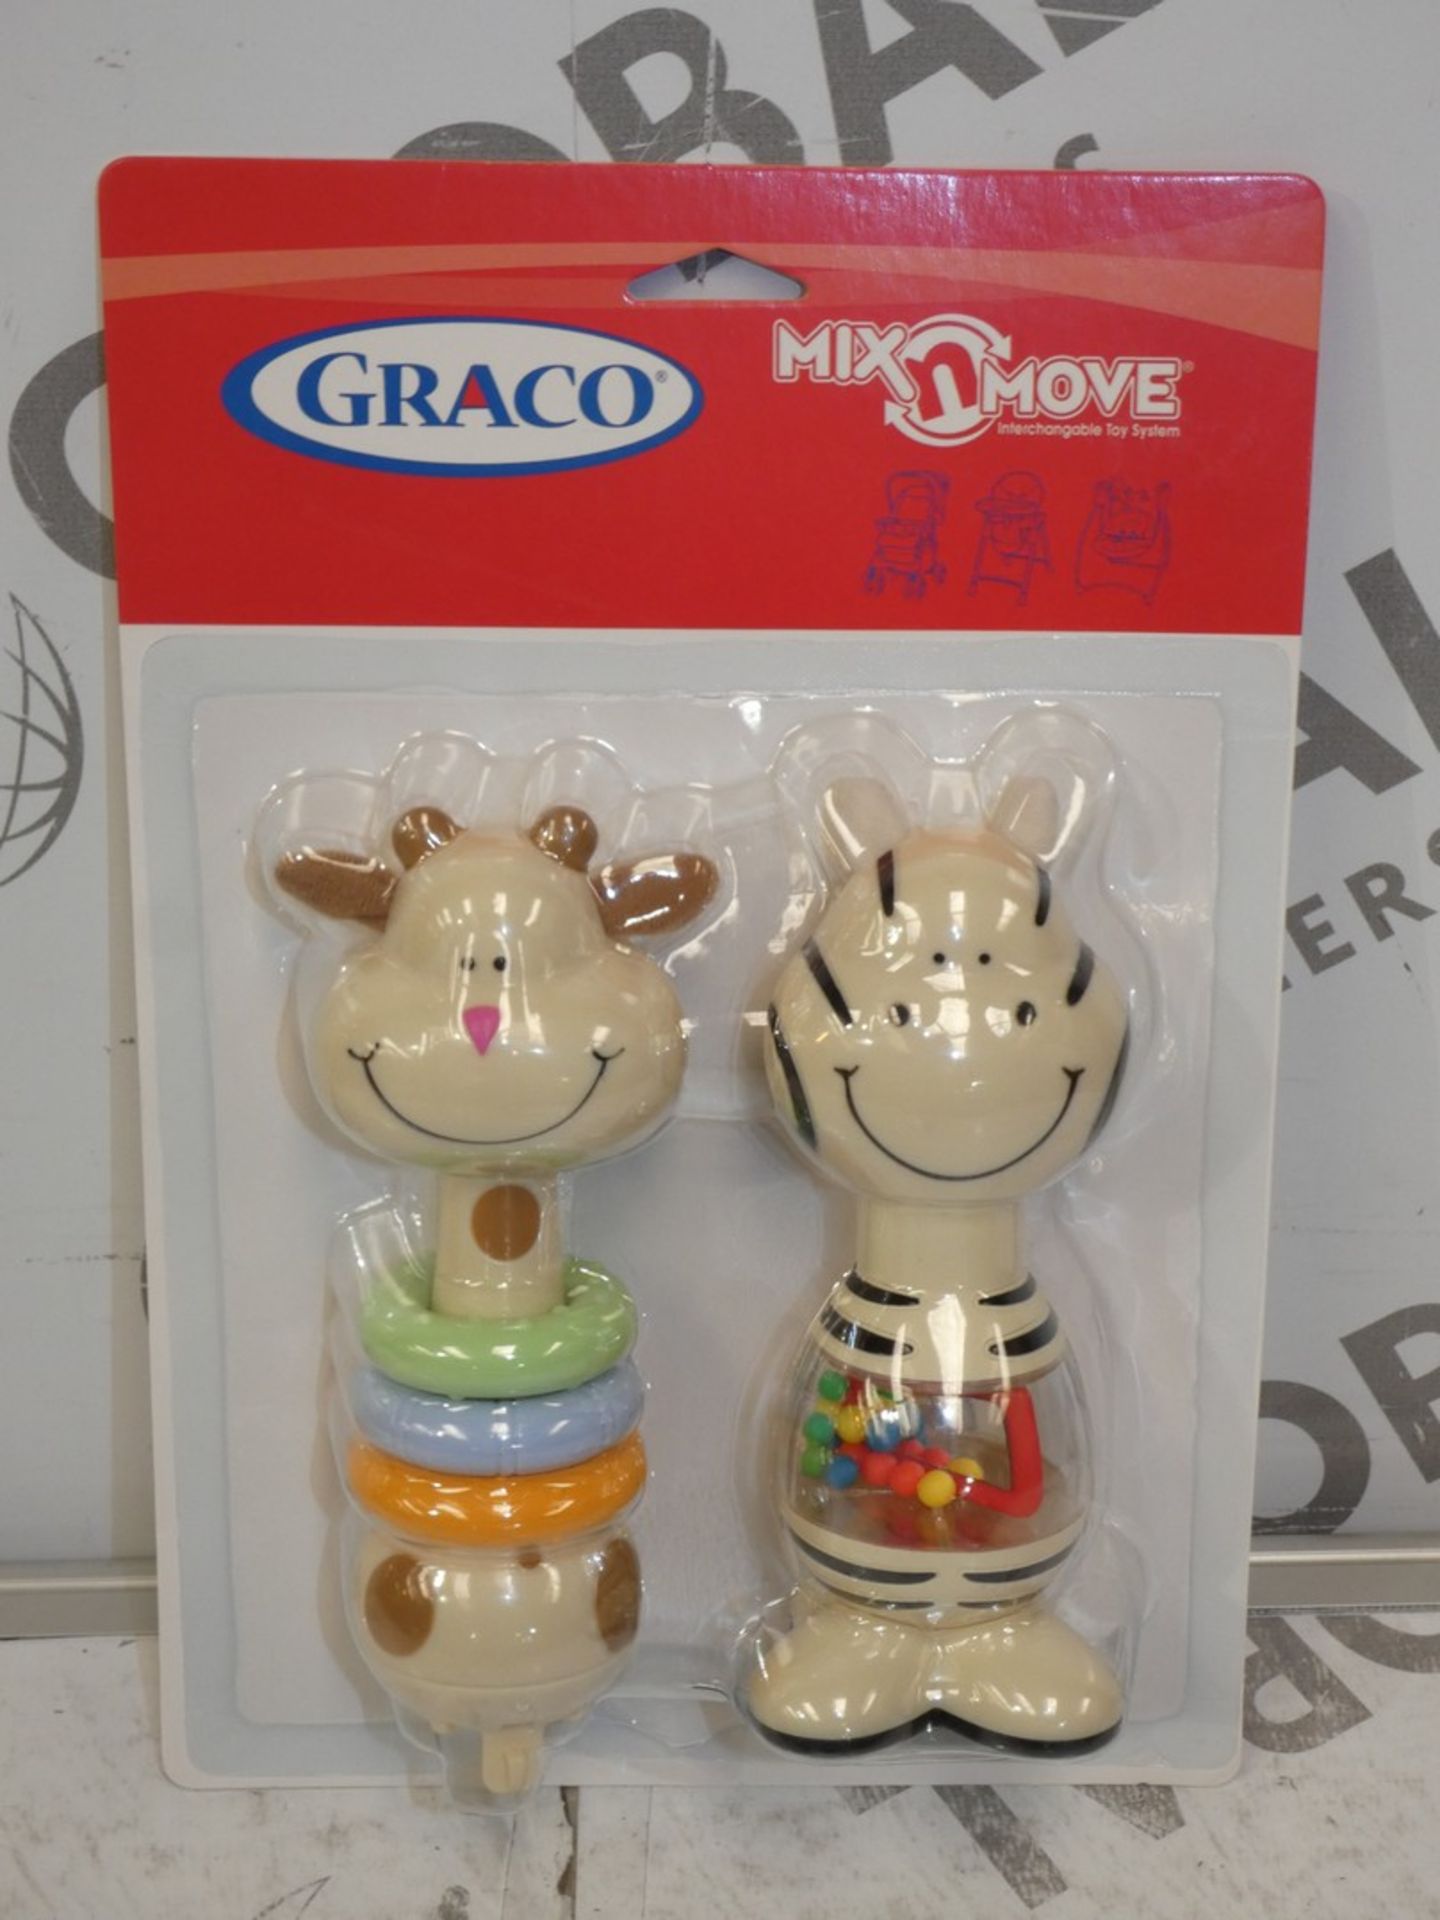 Boxed Brand New Graco Mix and Move Kids Rattle Sets RRP£9each